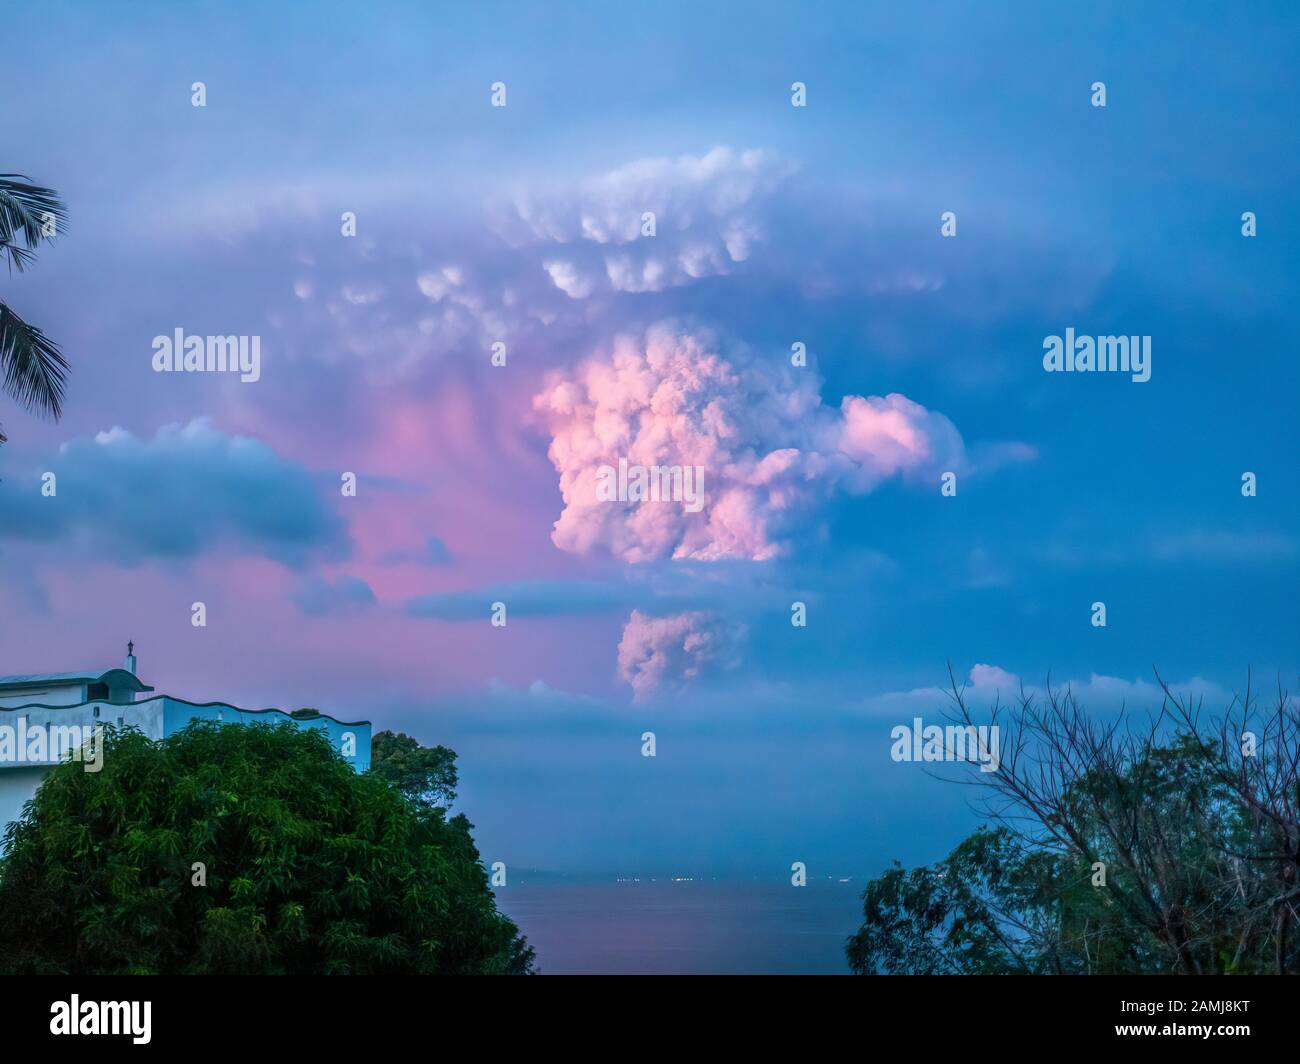 Taal Volcano eruption at sunset, Jan 12, 2020, its plume visible in the sky over the lights of Batangas City, viewed from Mindoro Is, 30 miles away. Stock Photo